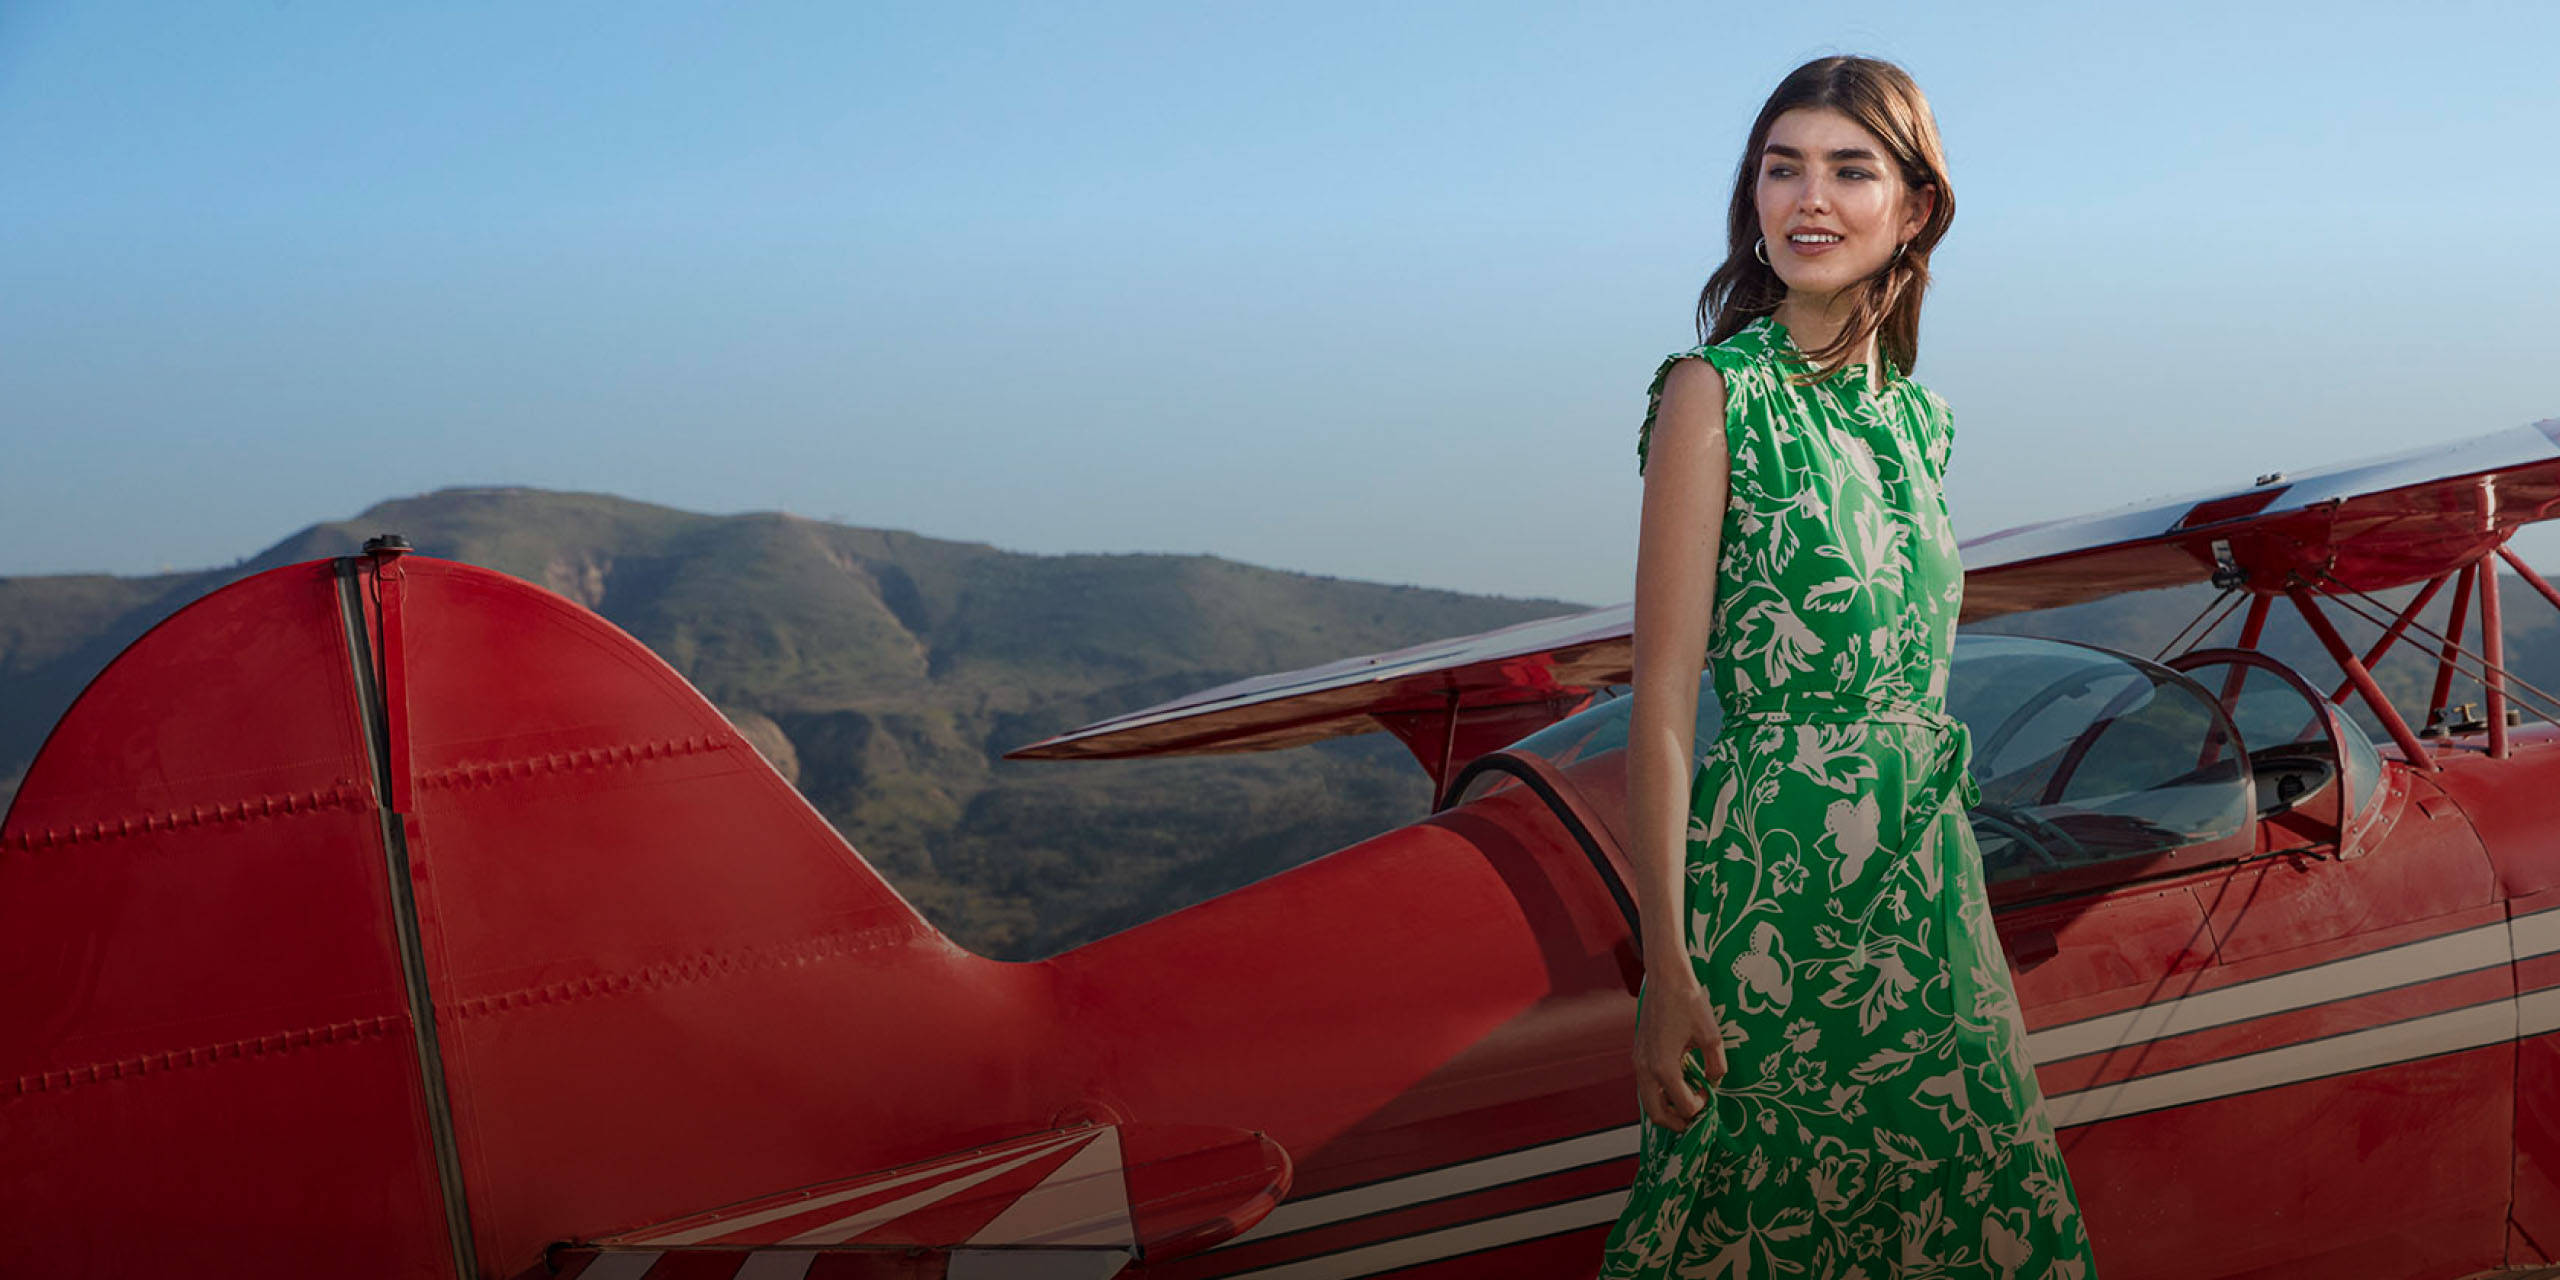 Image of model pictured in front of an aeroplane with a suitcase and wearing wedge sandals, a summer dress, sunglasses and a suede jacket.